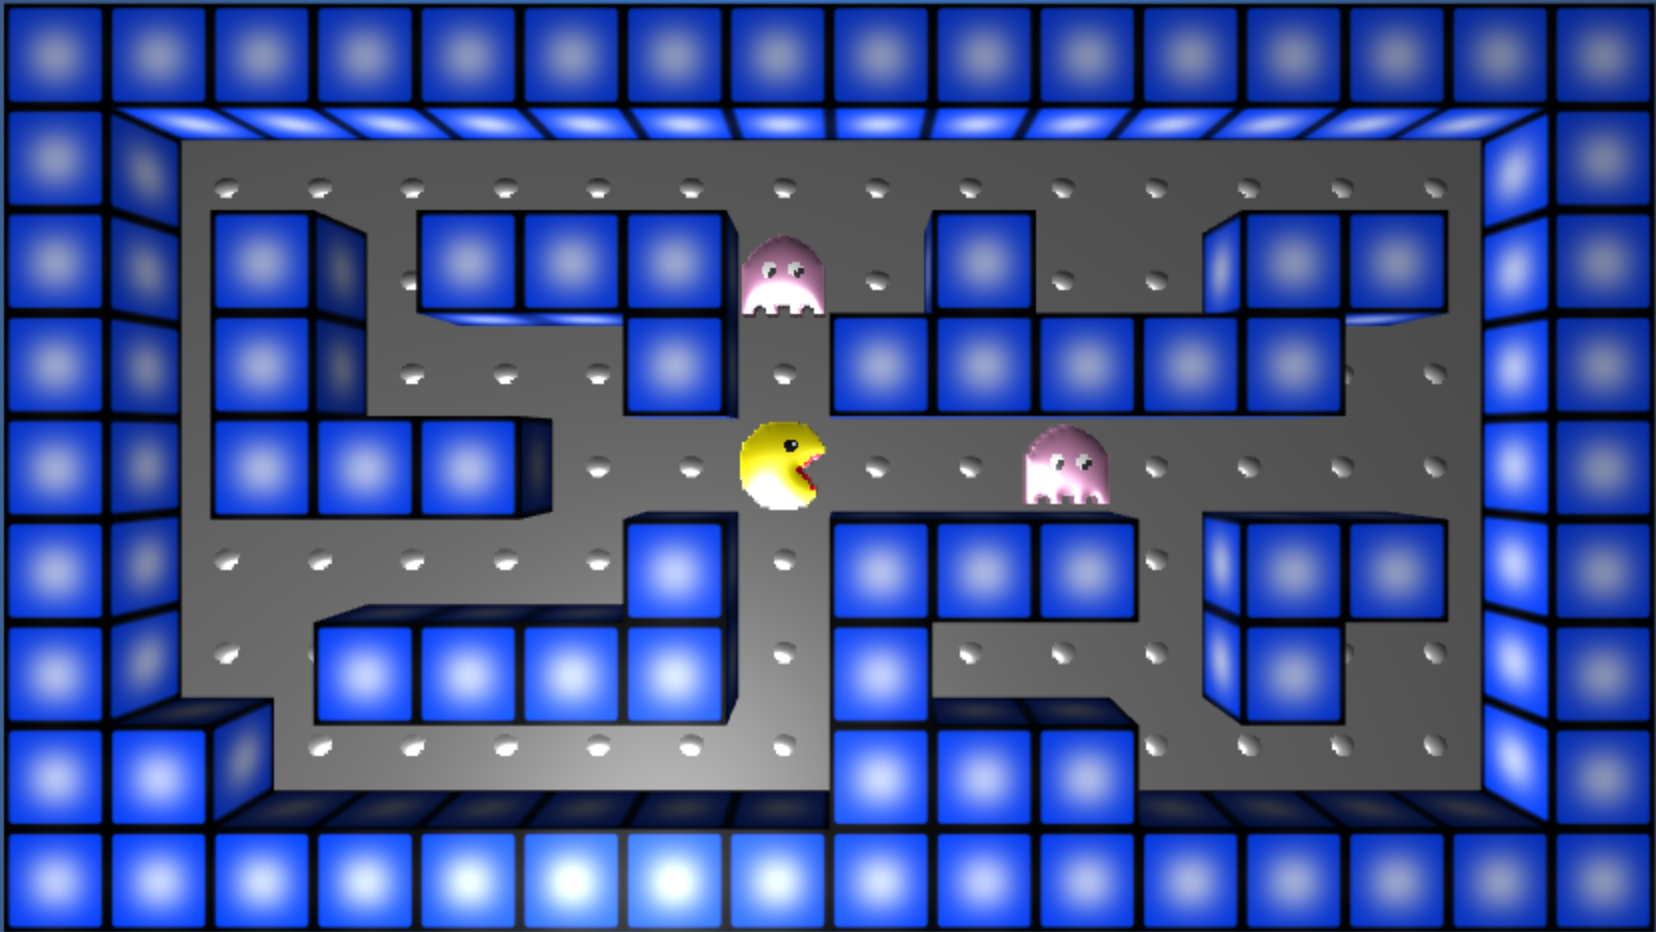 A Pacman game created with AgentCubes.